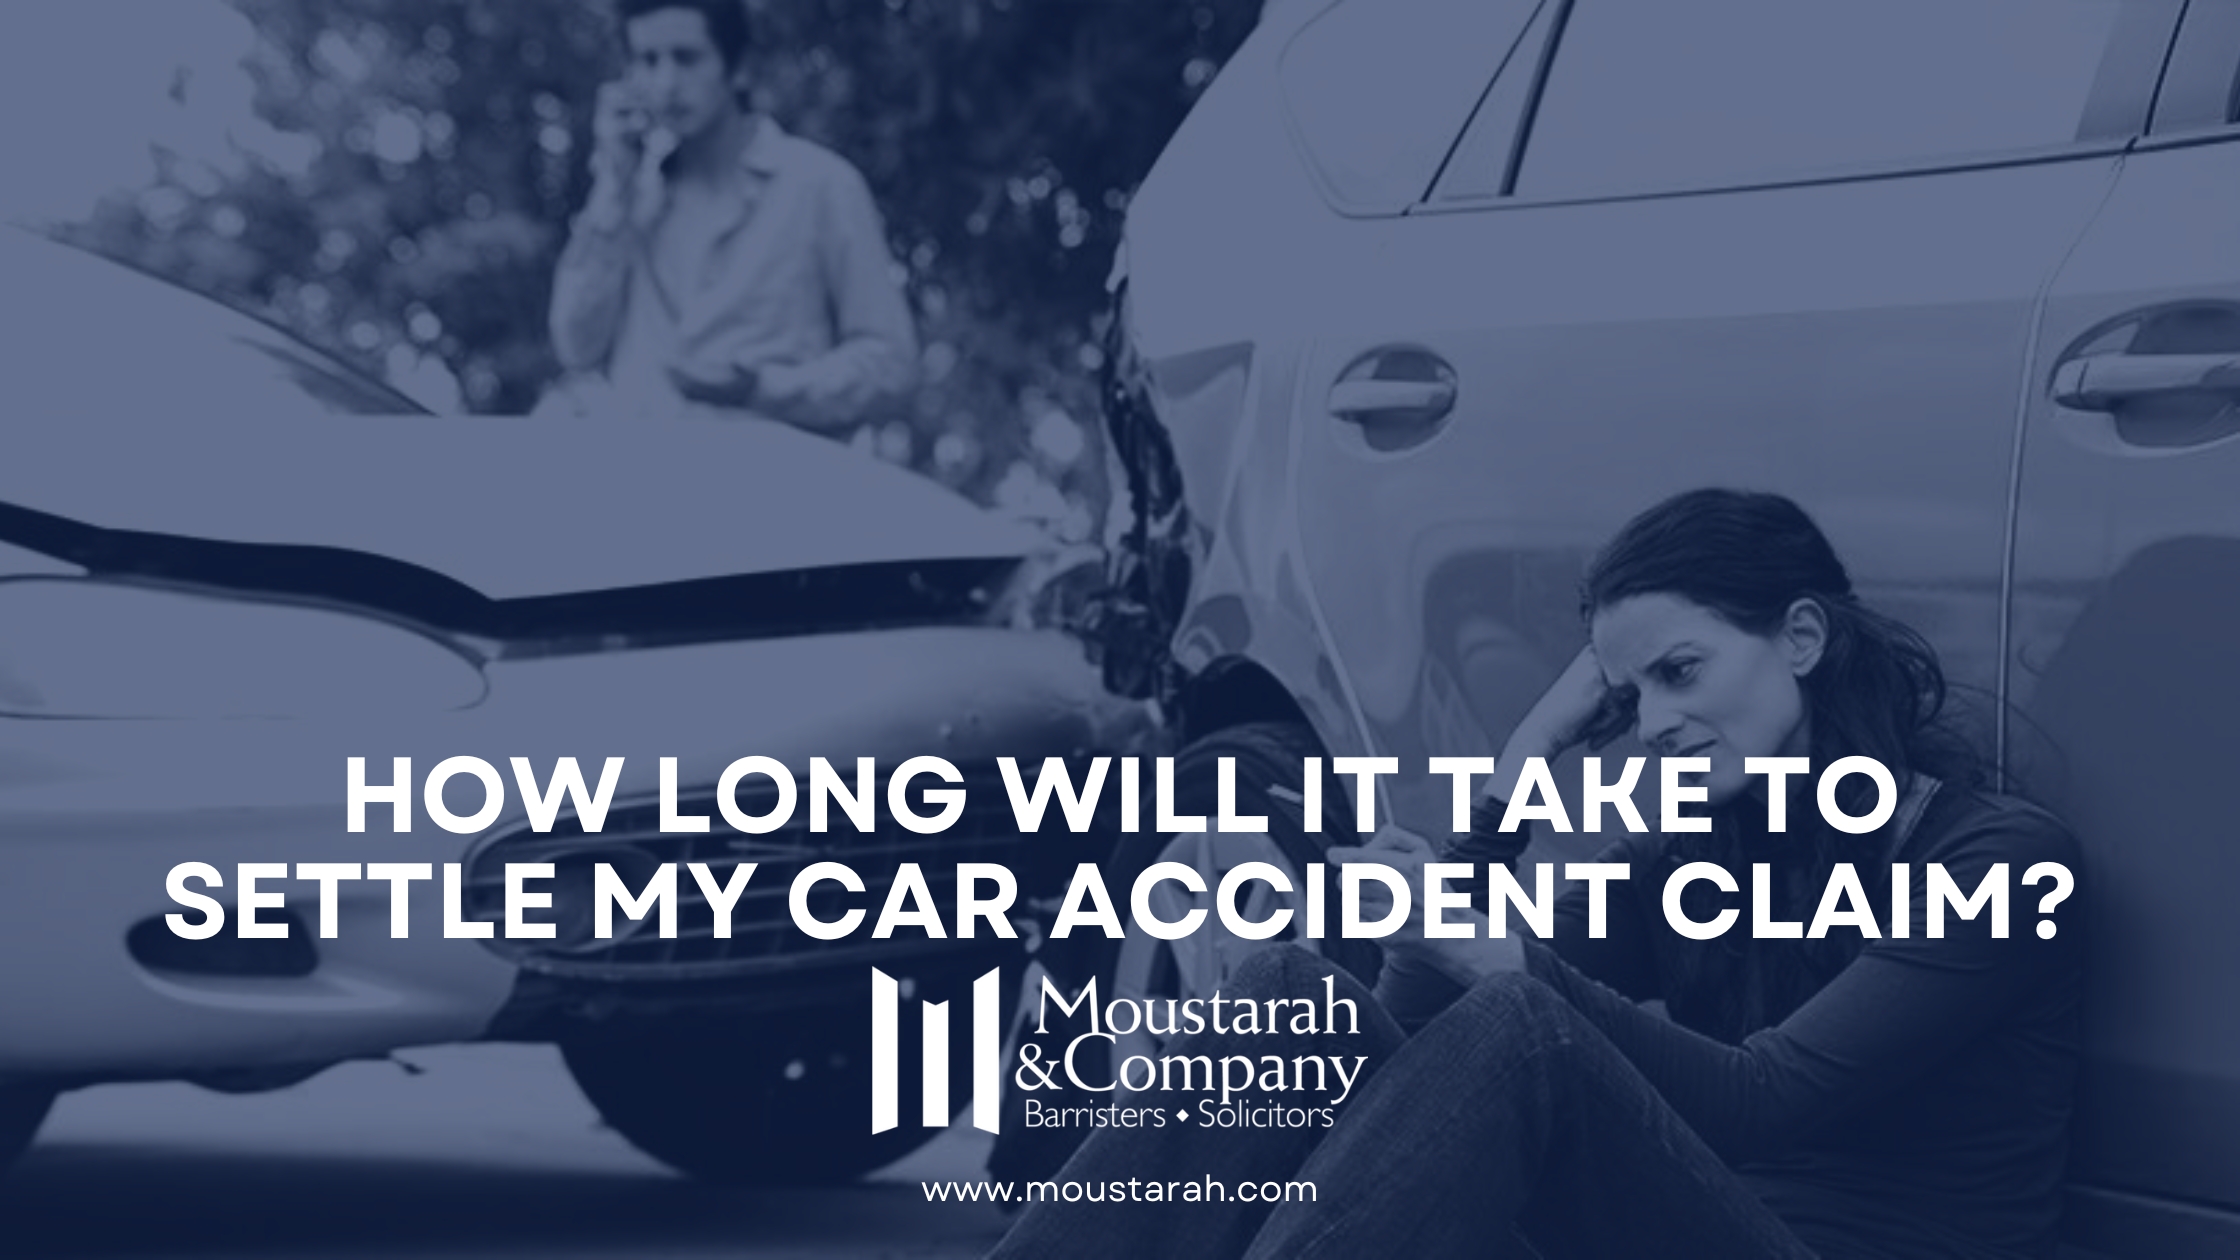 HOW LONG WILL IT TAKE TO SETTLE MY CAR ACCIDENT CLAIM